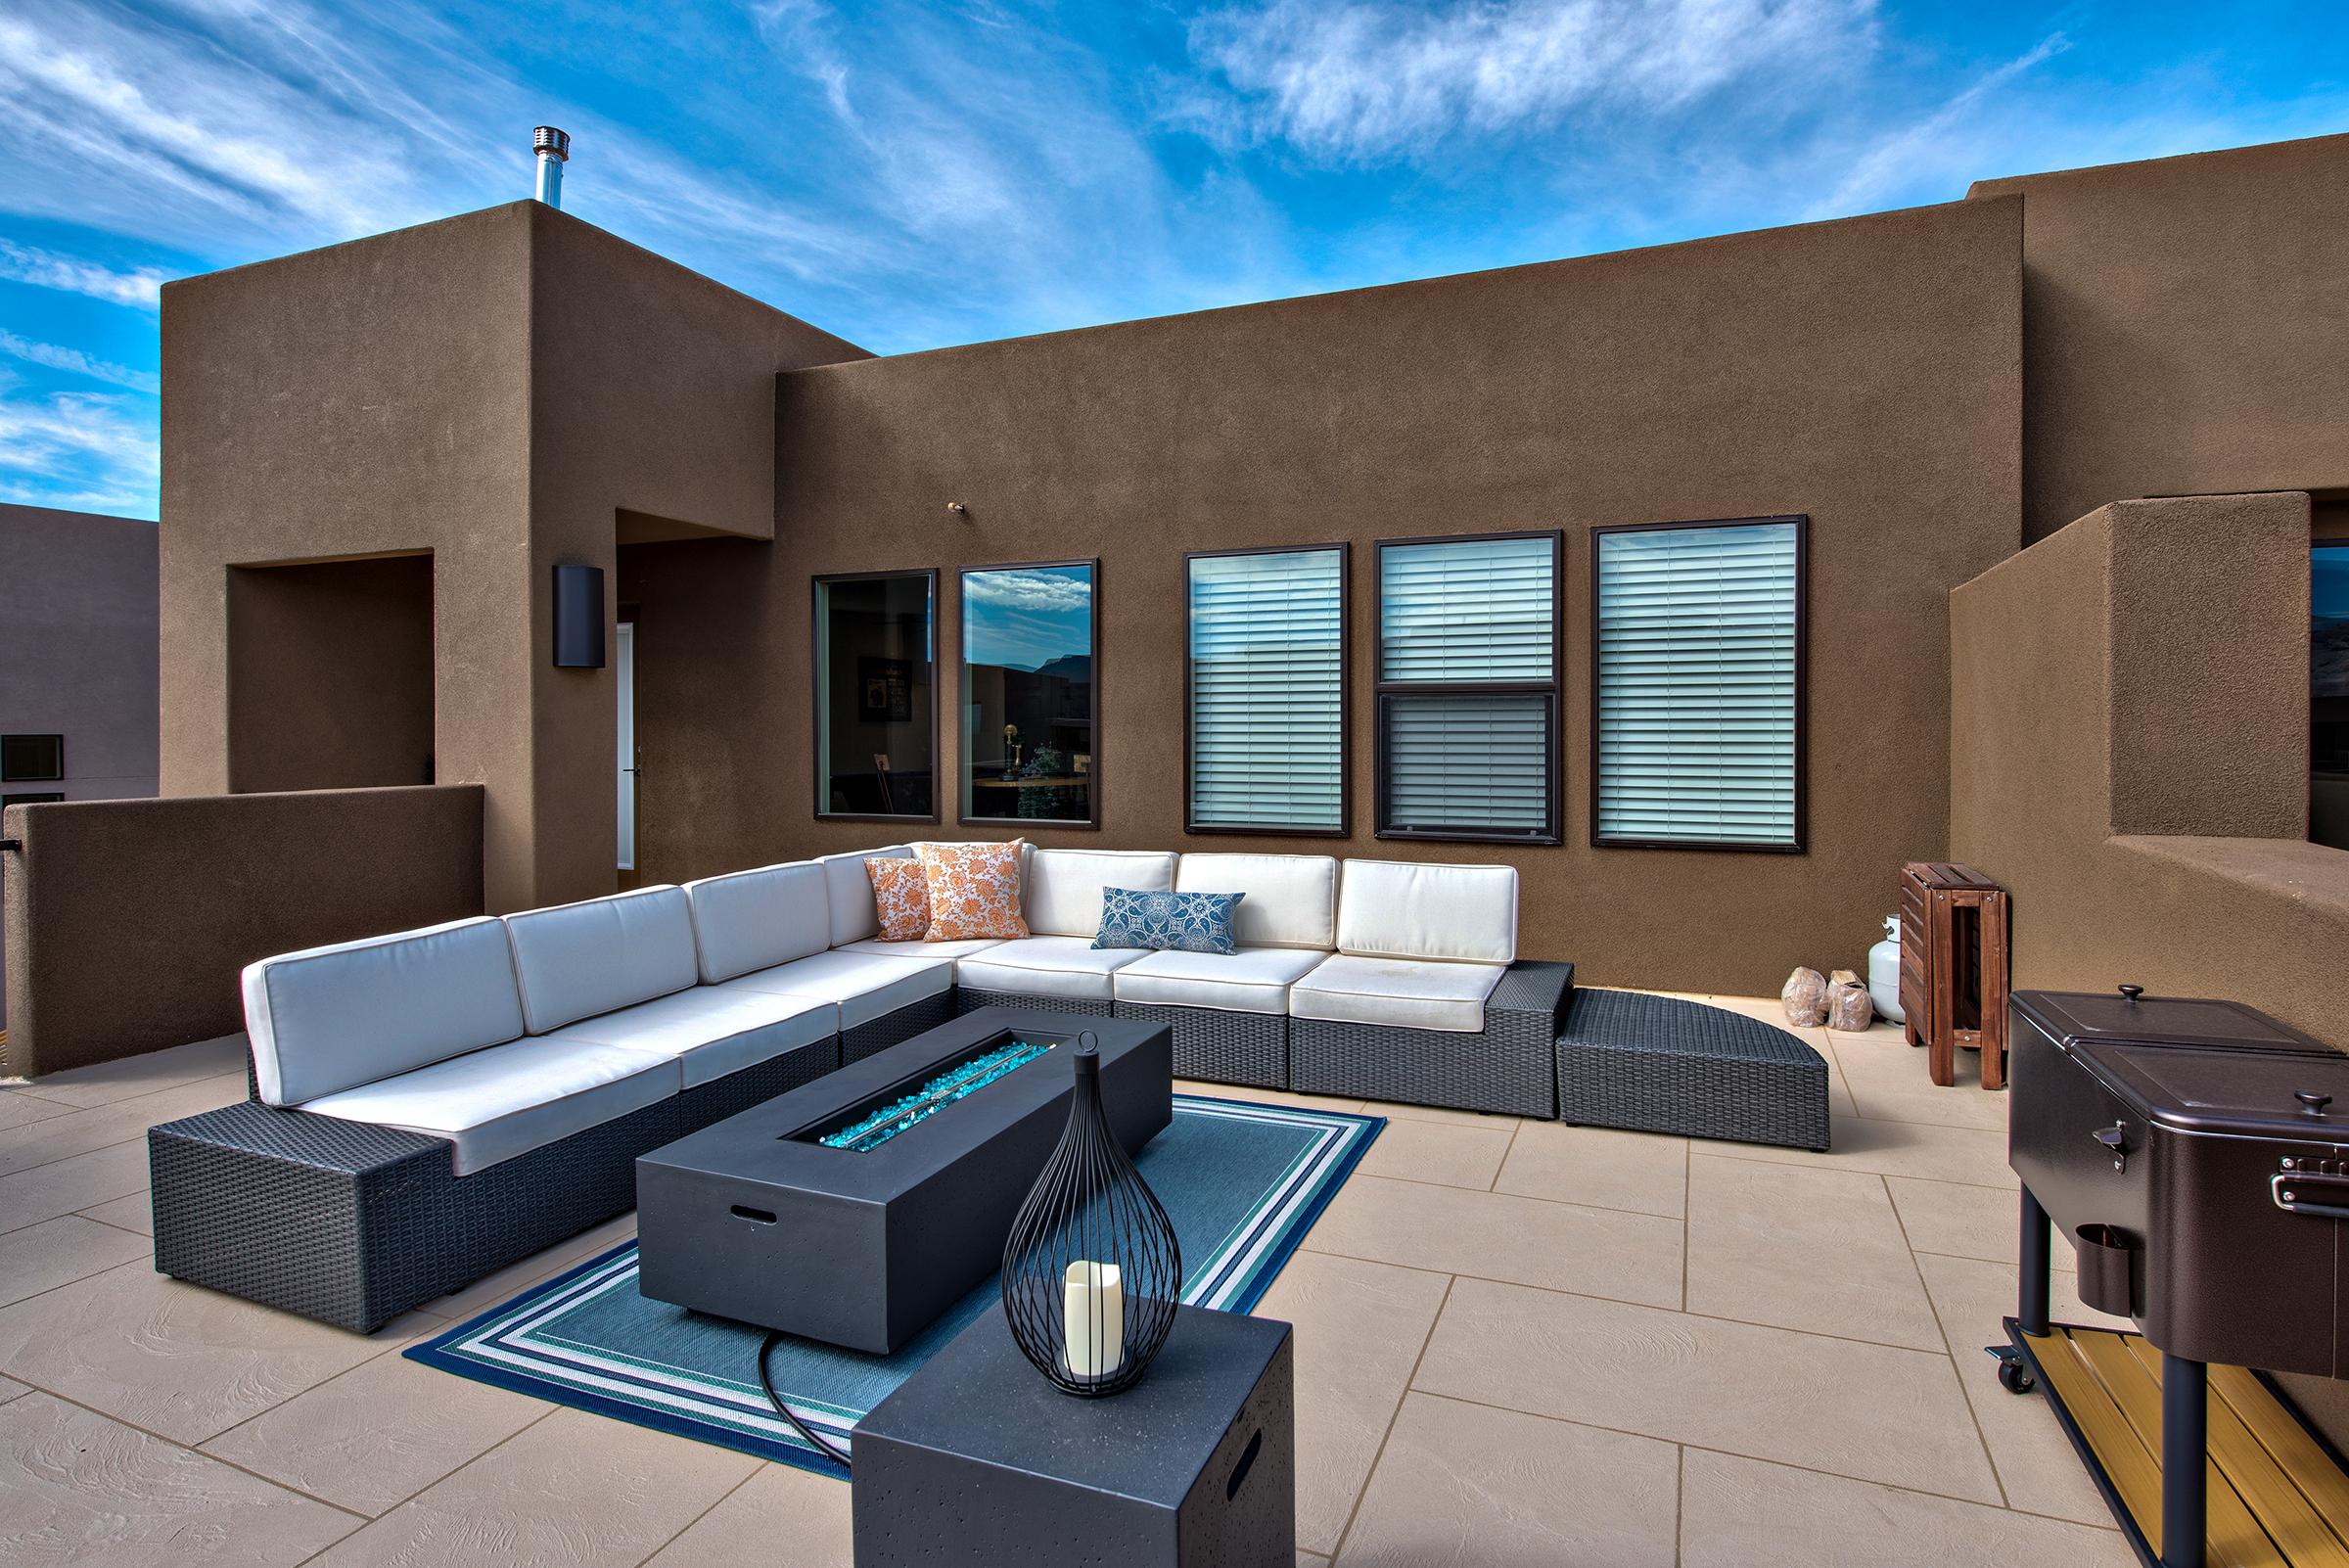 Stay warm next to the gas firepit and relax while watching the sunset over the red mountains.